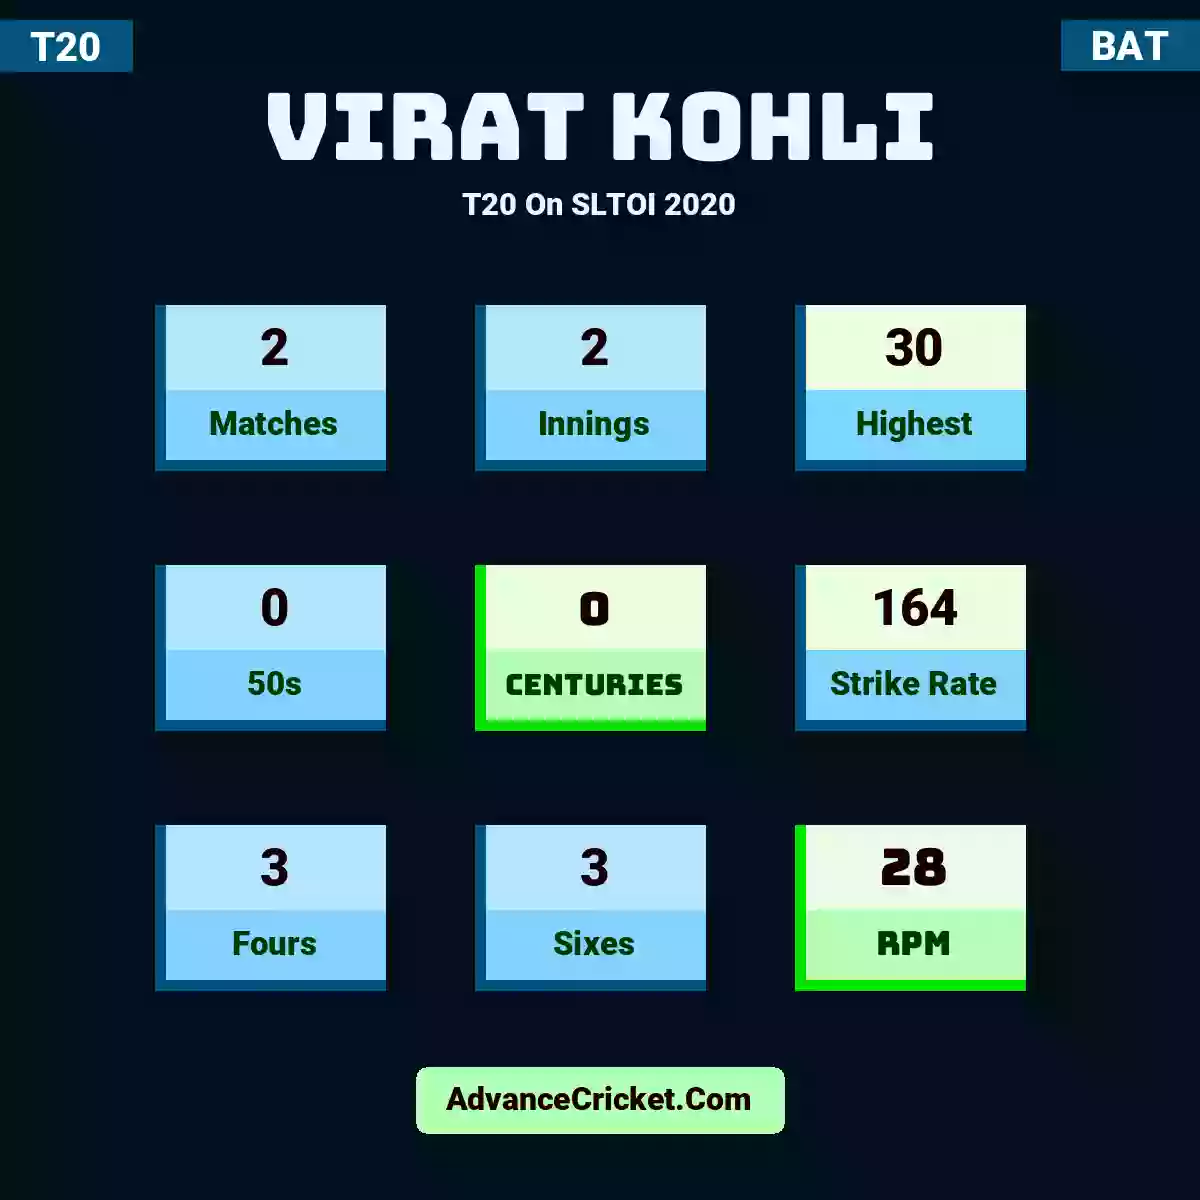 Virat Kohli T20  On SLTOI 2020, Virat Kohli played 2 matches, scored 30 runs as highest, 0 half-centuries, and 0 centuries, with a strike rate of 164. V.Kohli hit 3 fours and 3 sixes, with an RPM of 28.